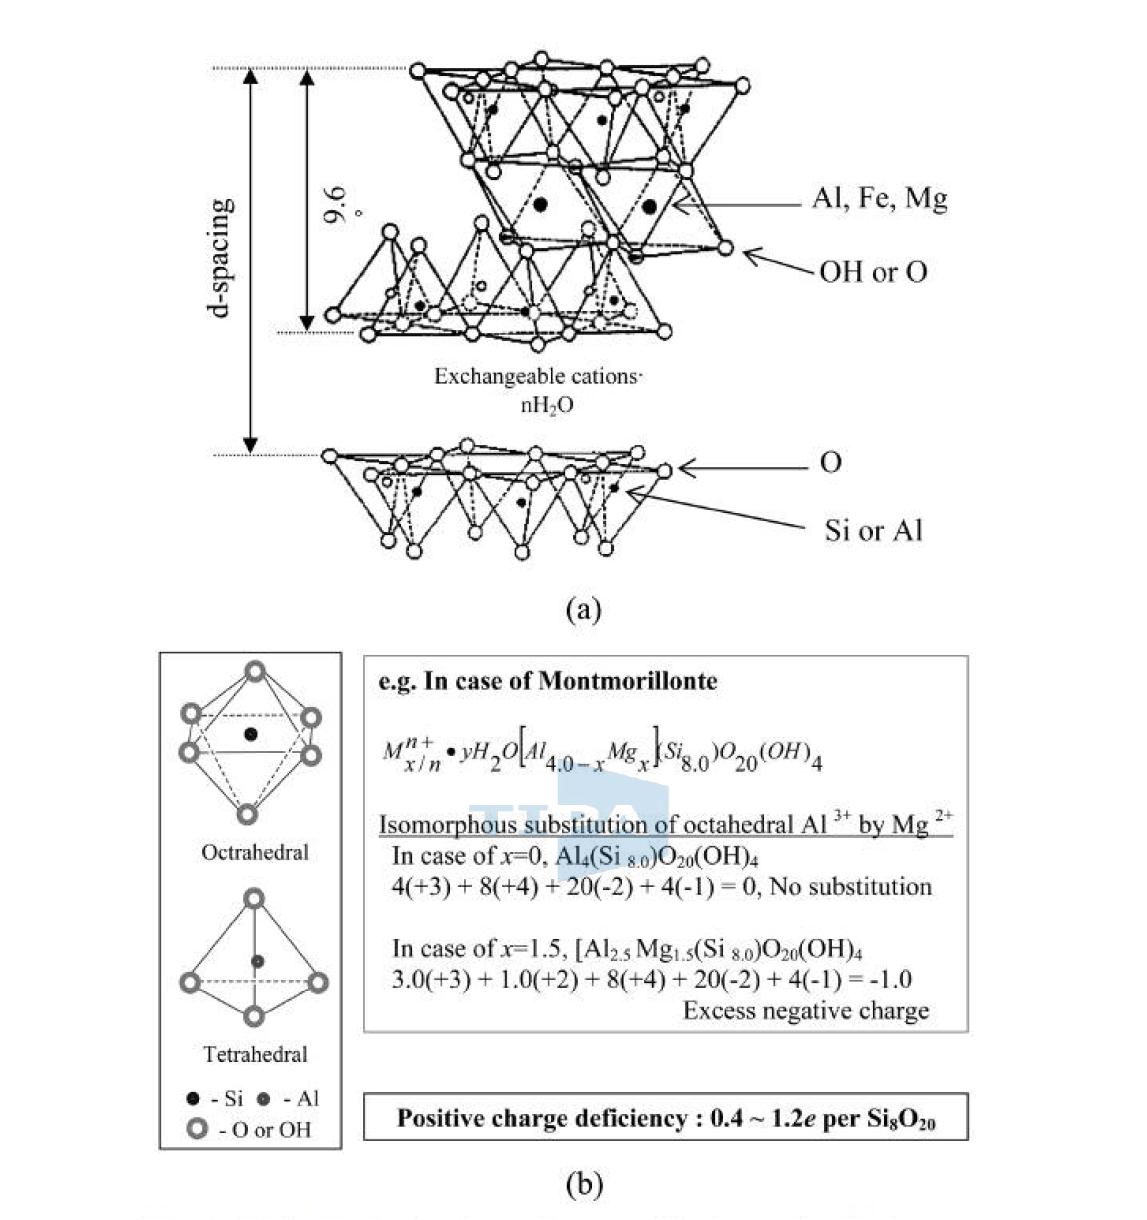 (a) Idealized structure of a smectite clay, (b) Isomorphous substitution of octahedral lattice.